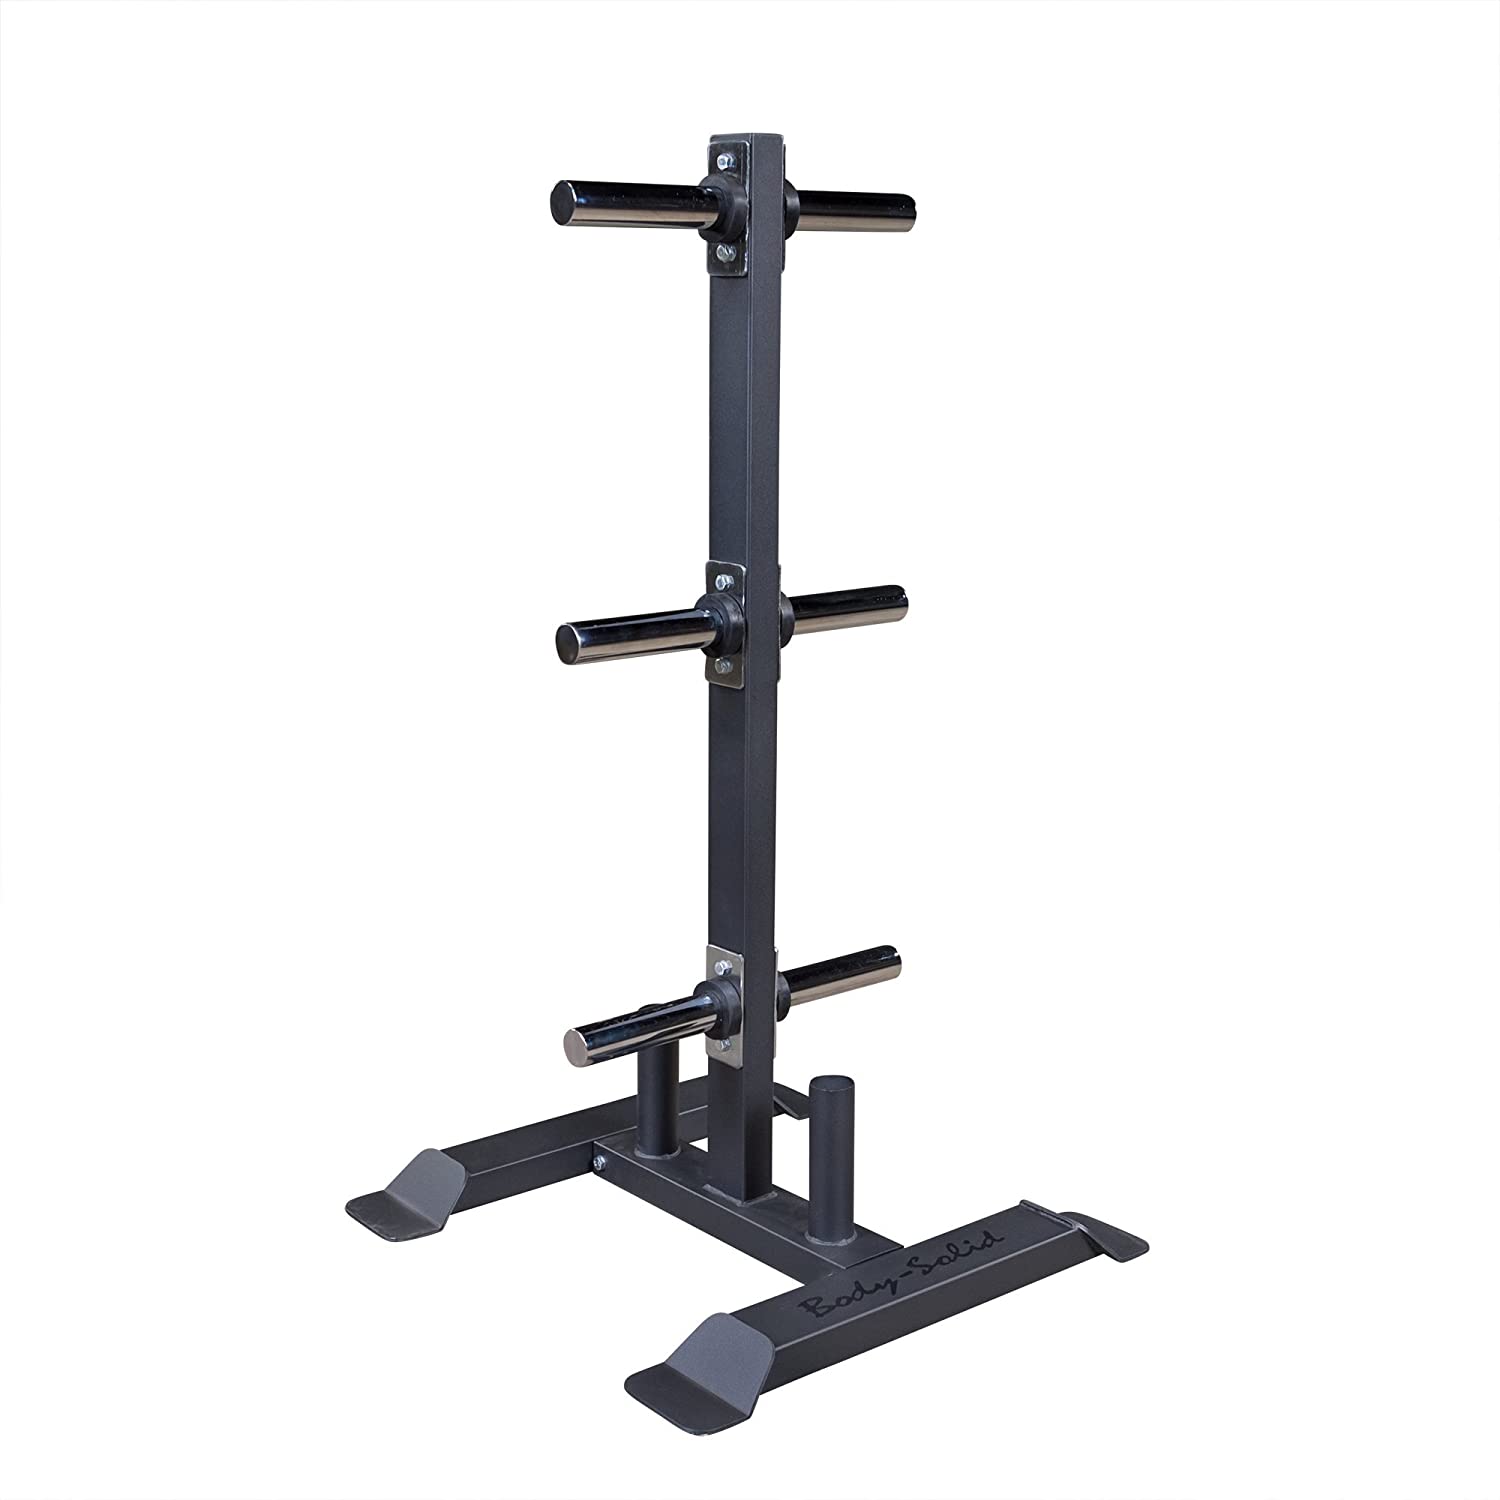 Body-Solid GWT56 Vertical Weight Tree with Bar Holder full view | Fitness Experience